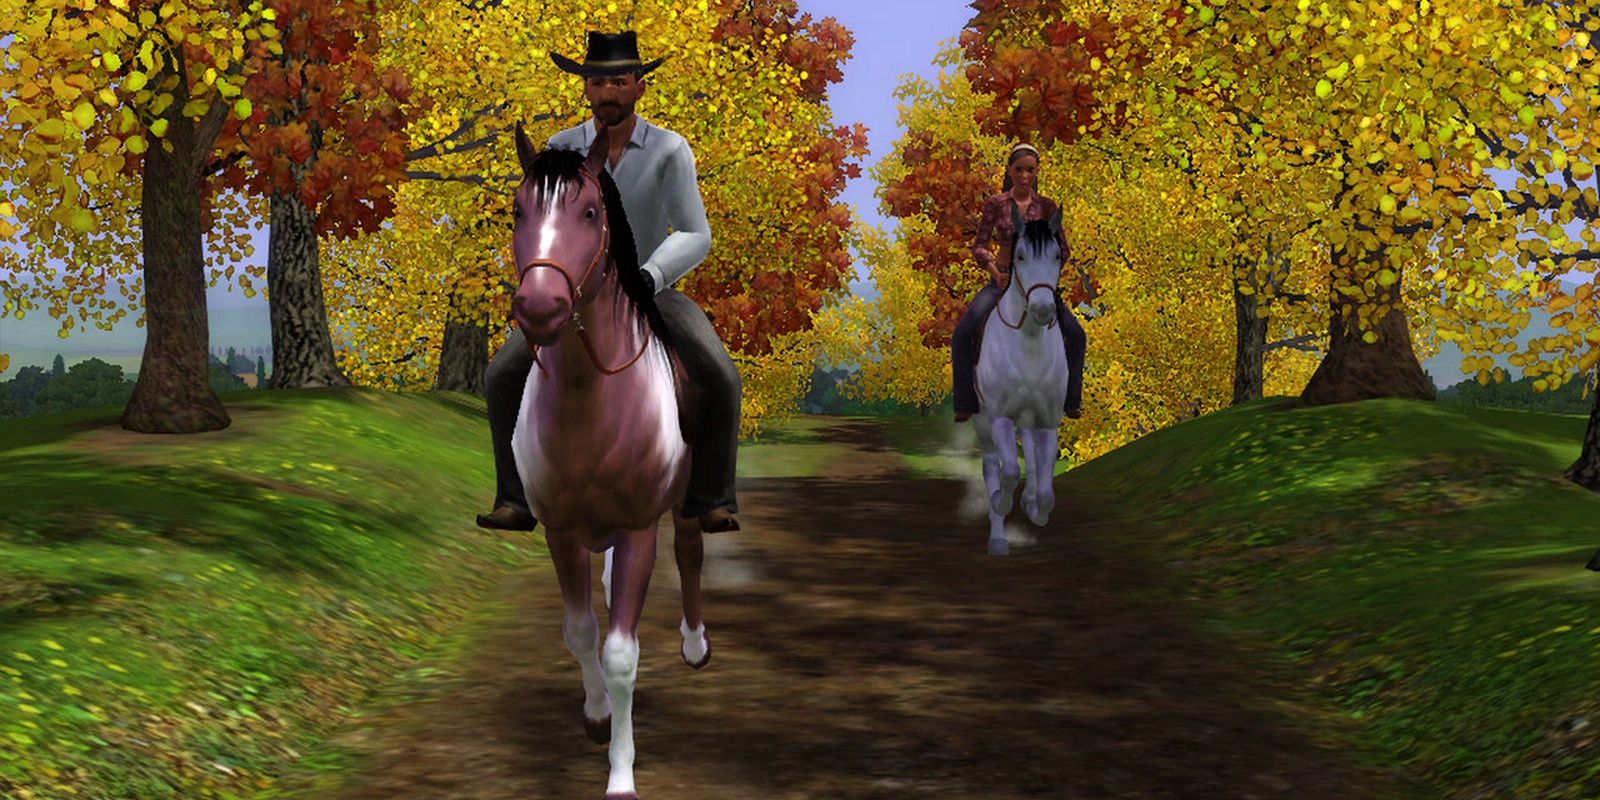 The Sims 3 Pets: 2 Sims Riding on Horses Down Trail